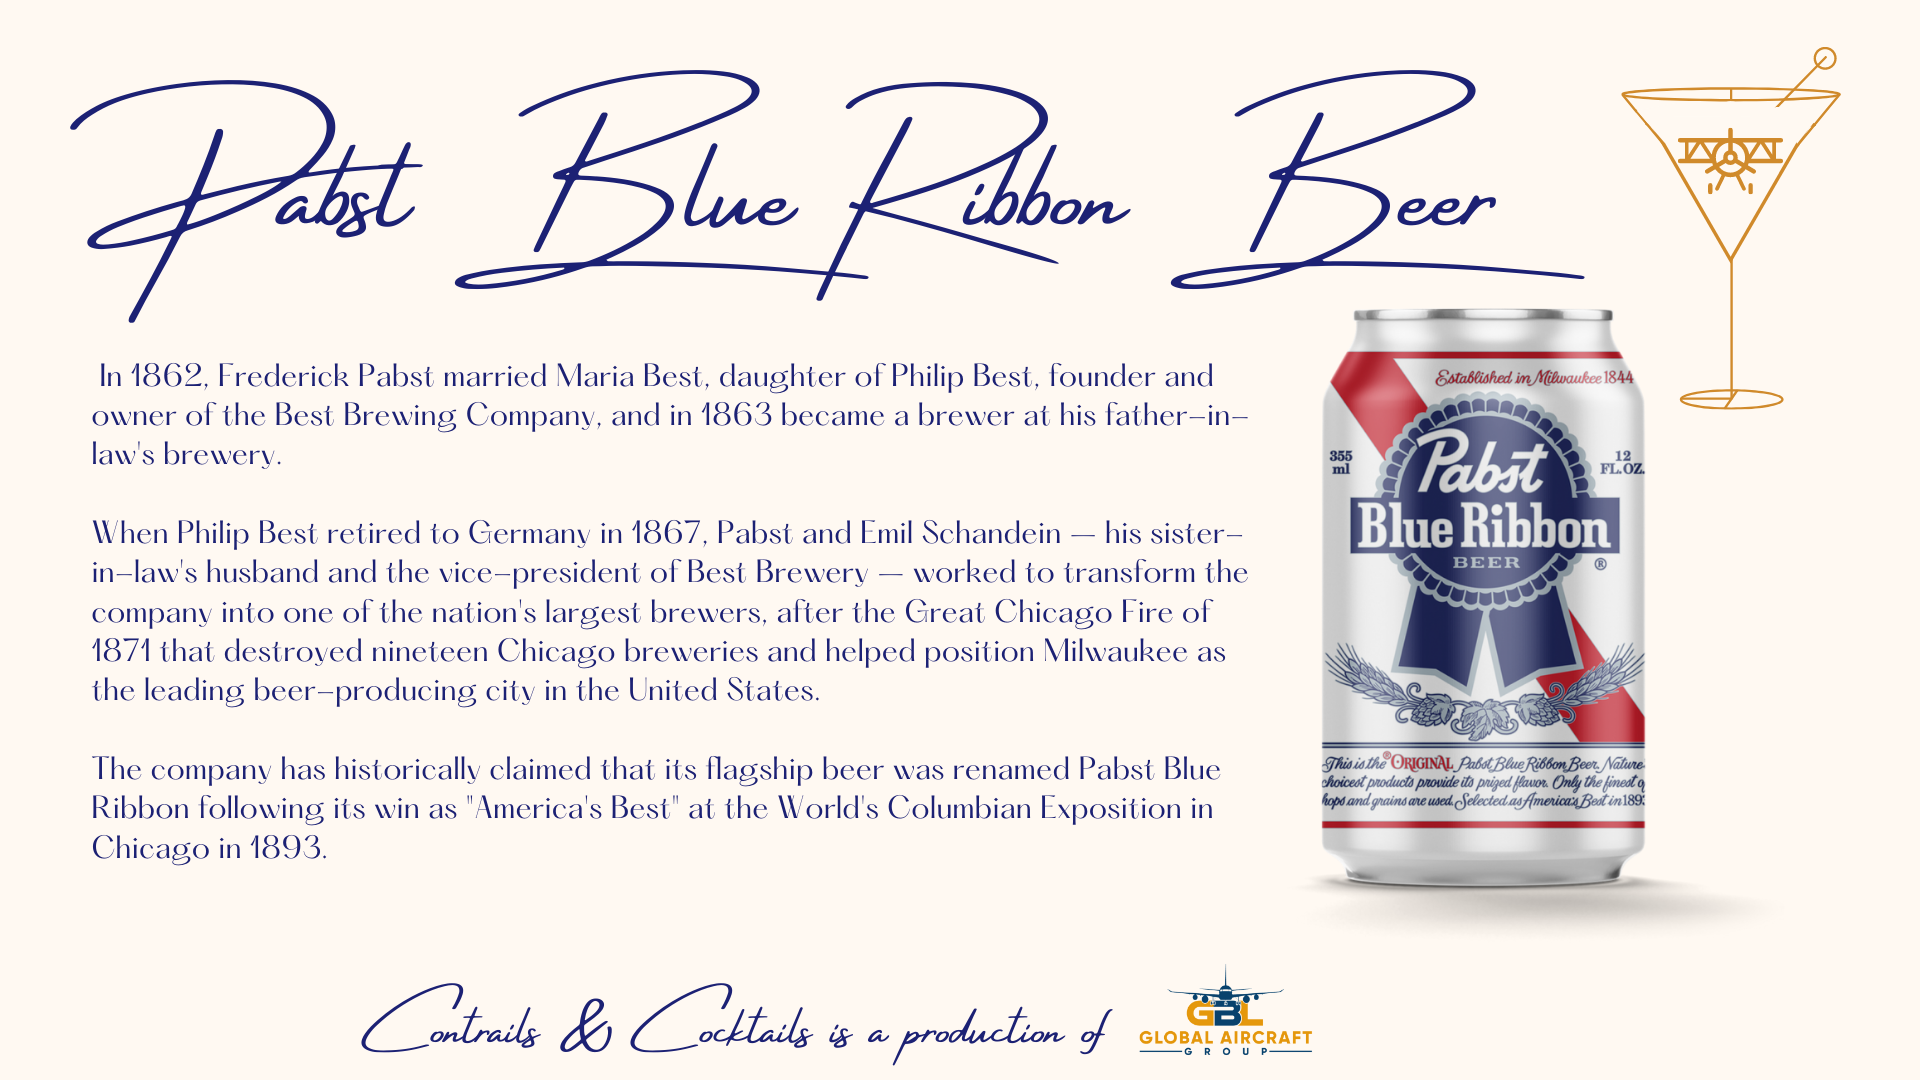 Contrails & Cocktails - Pabst Blue Ribbon Beer